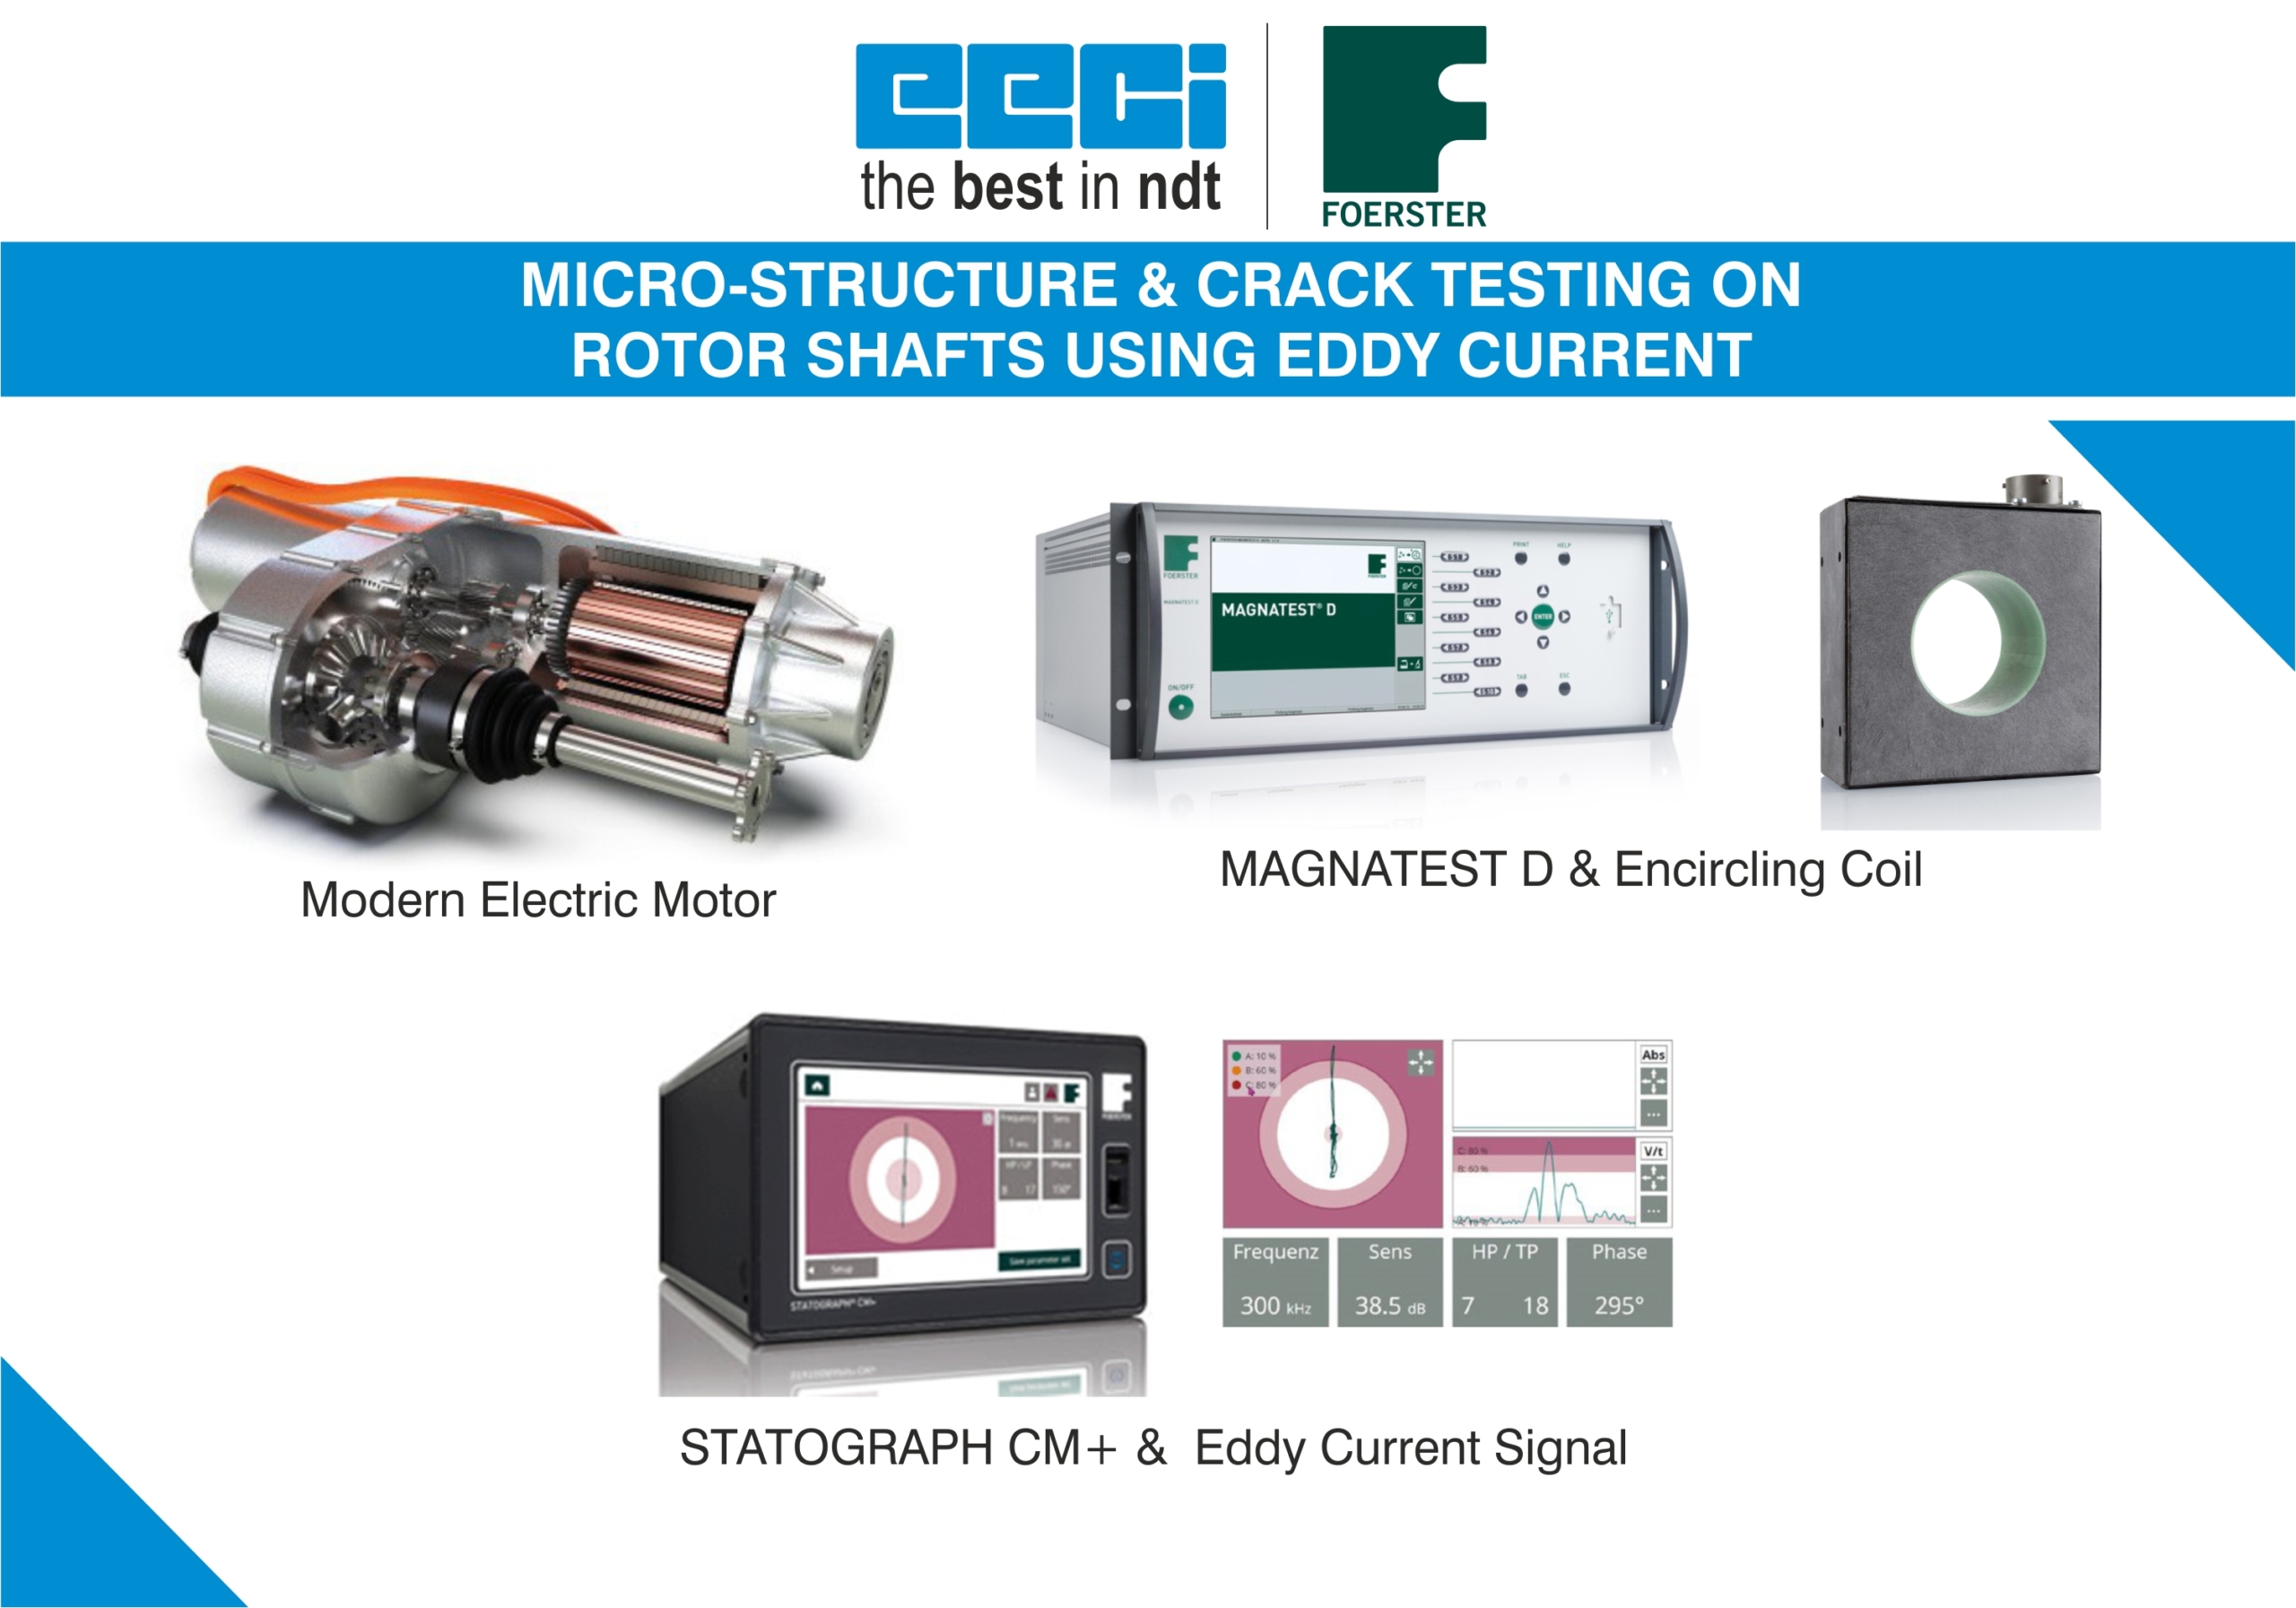 MICROSTRUCTURE & CRACK TESTING OF ROTOR SHAFTS USING EDDY CURRENT